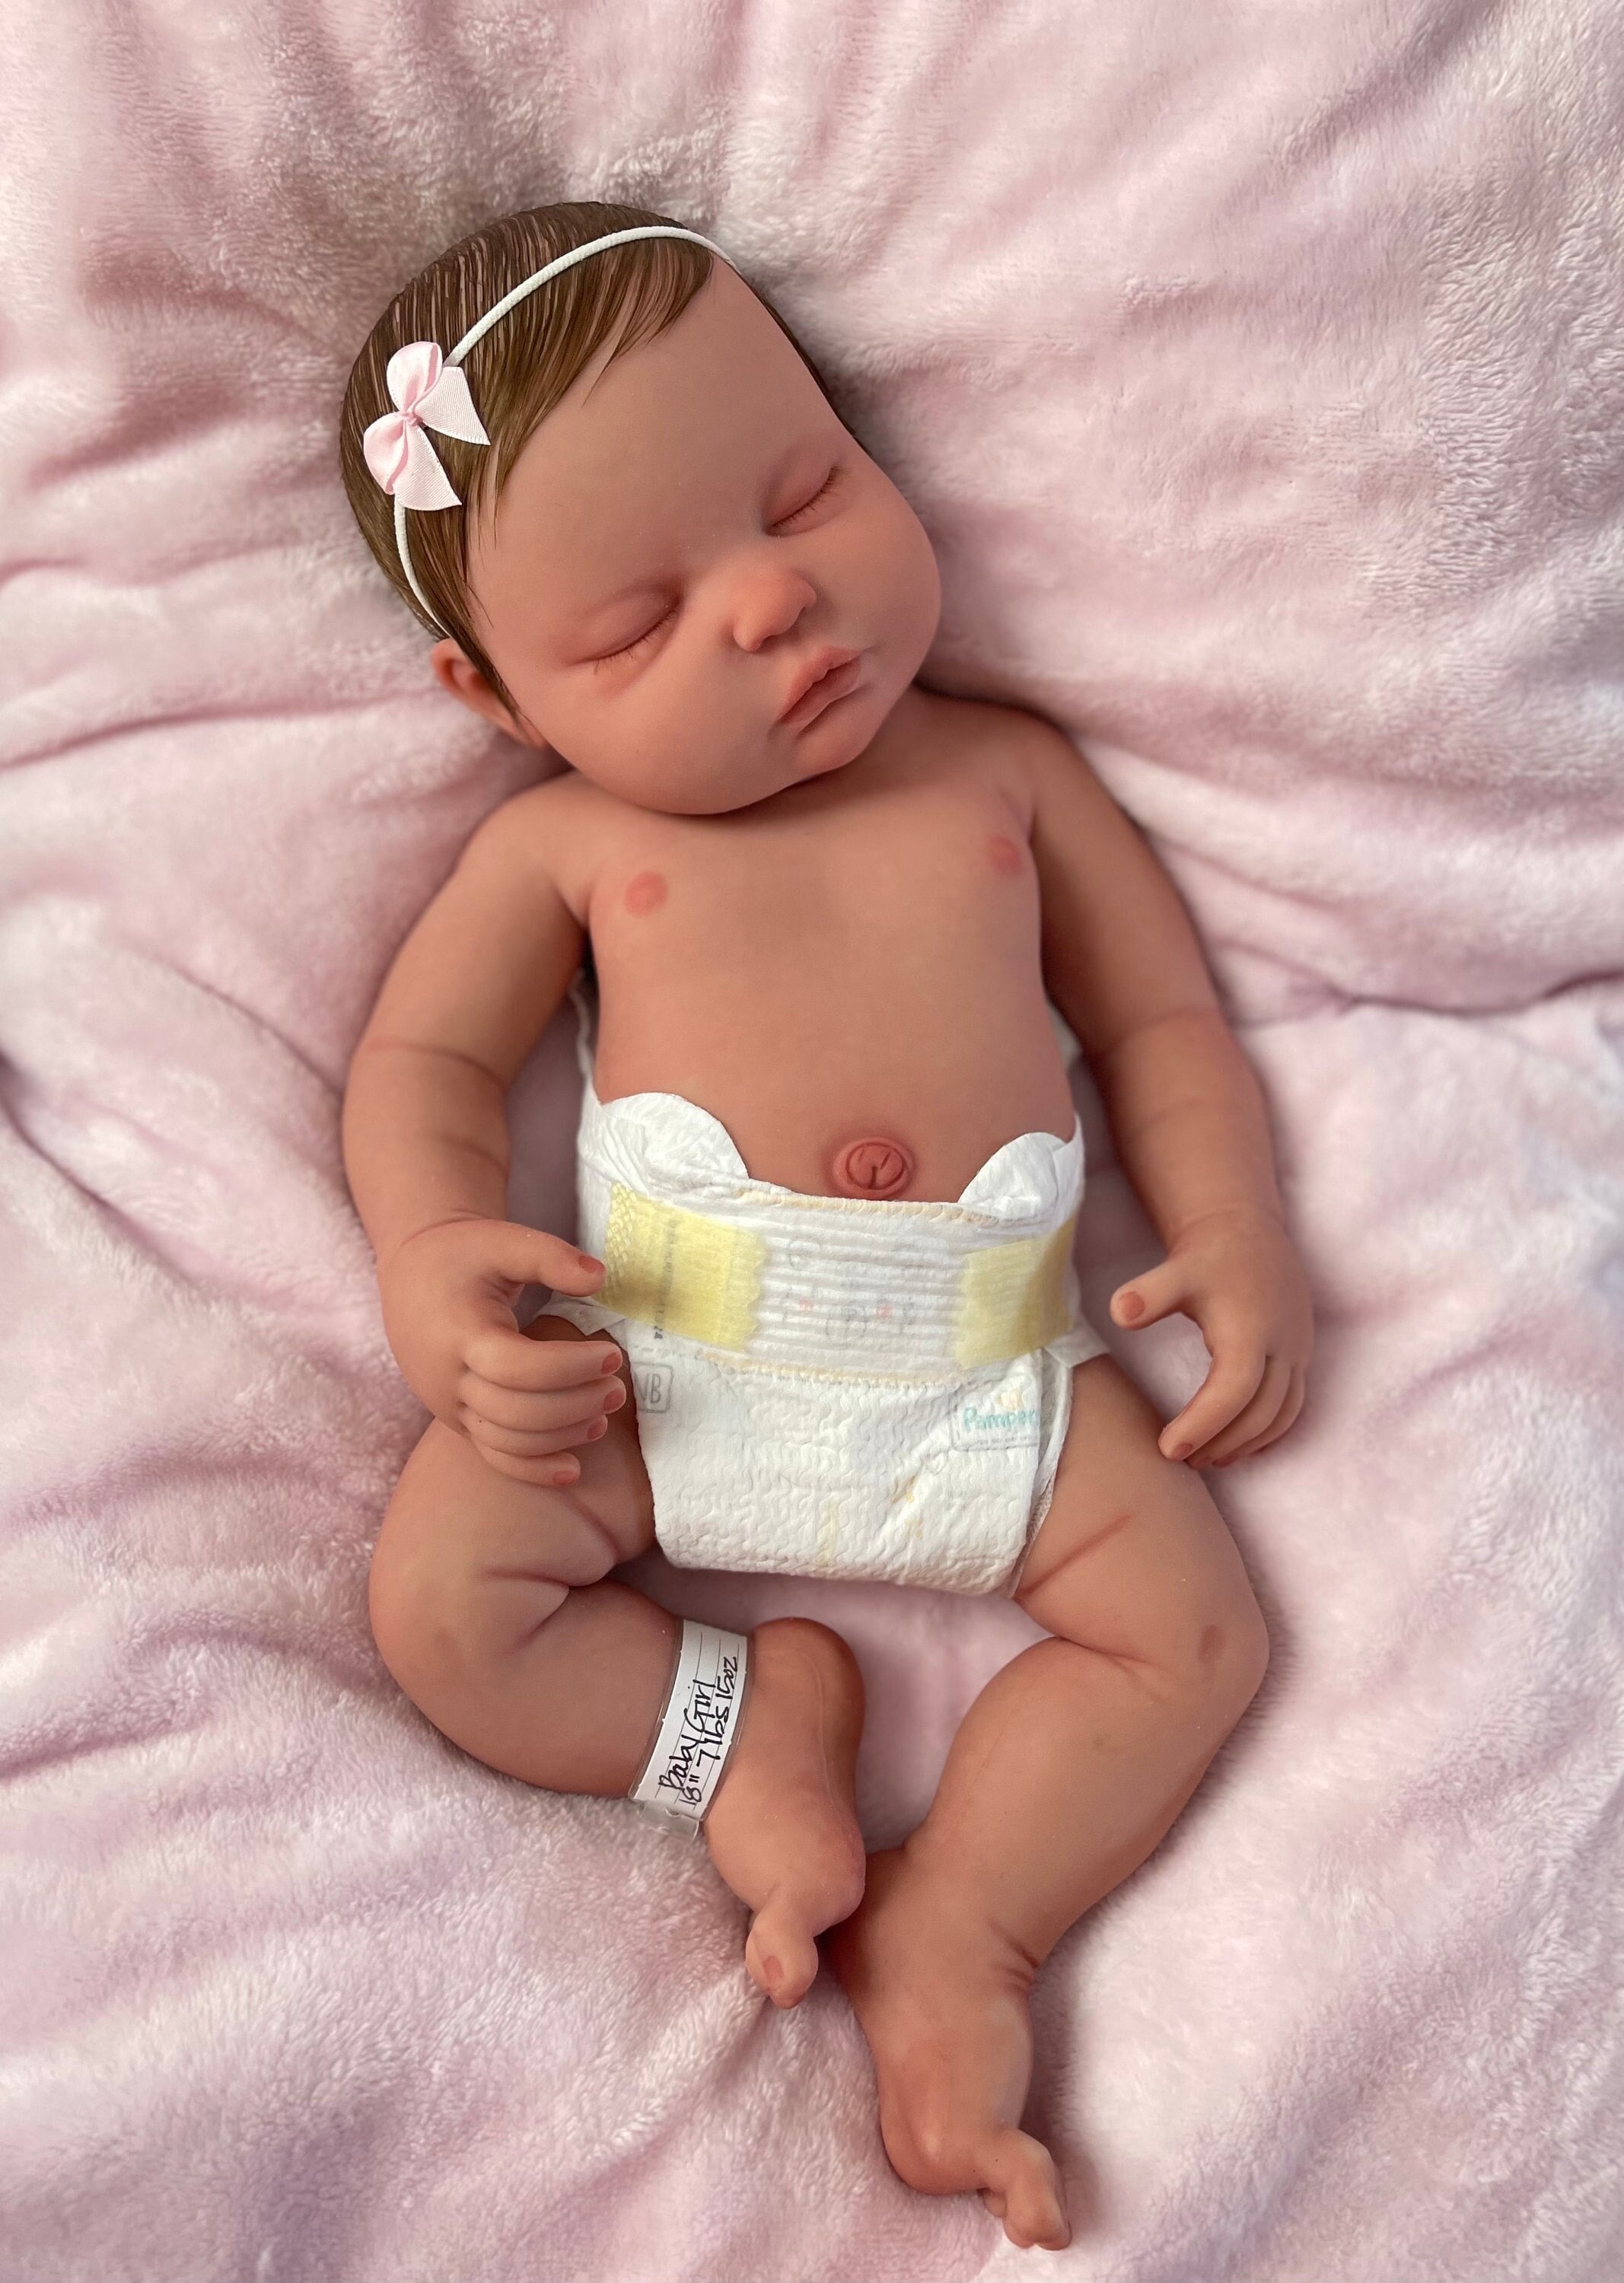 Full Body Silicone Anatomically Correct Baby GIRL, 18 Inches Long